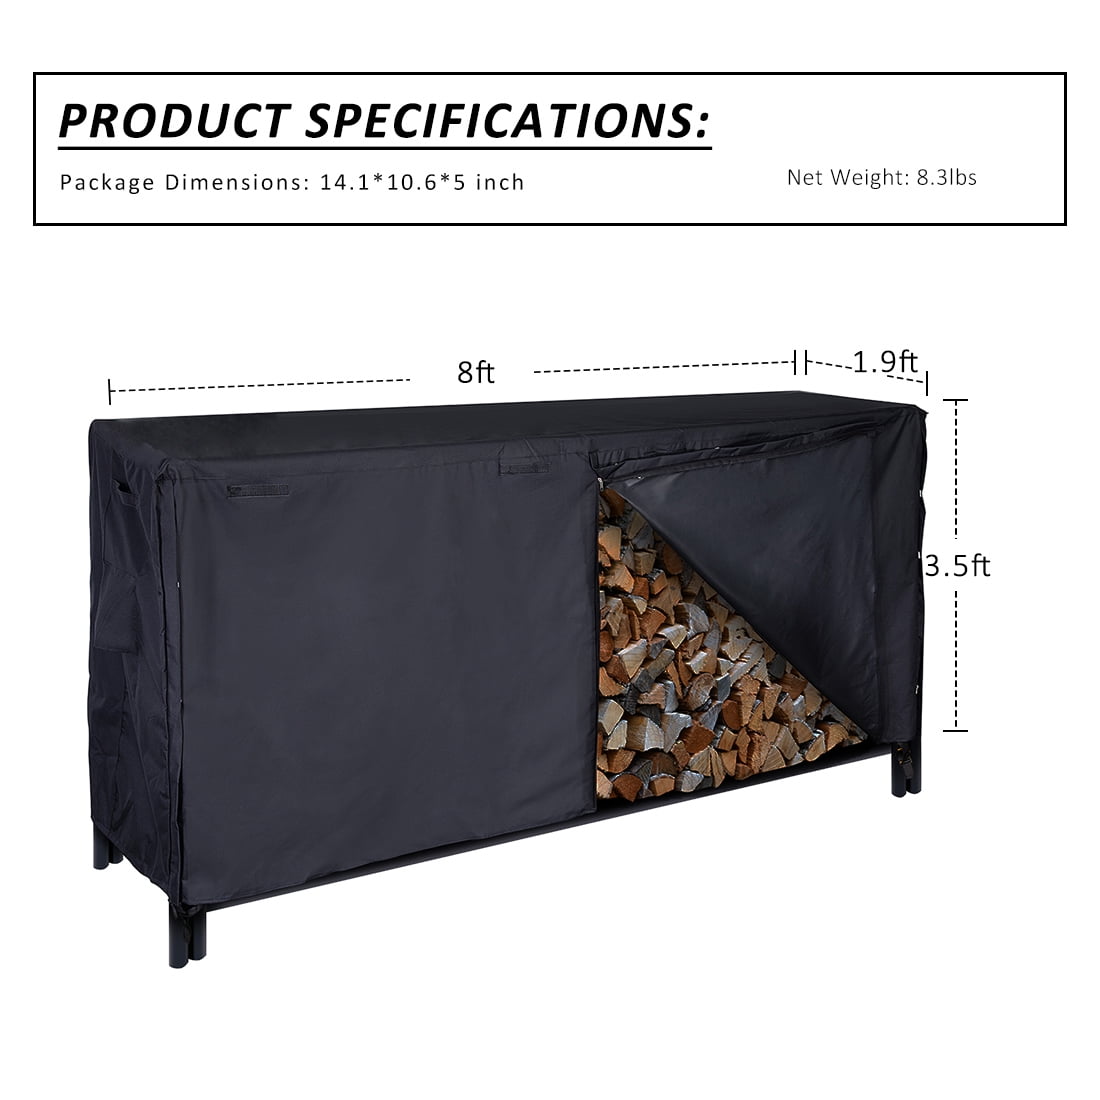 Heavy Duty and Water Resistant 600D Oxford Firewood Cover All Weather Protection ManGan Firewood Rack Cover 8ft Log Rack Cover Black 8feet 